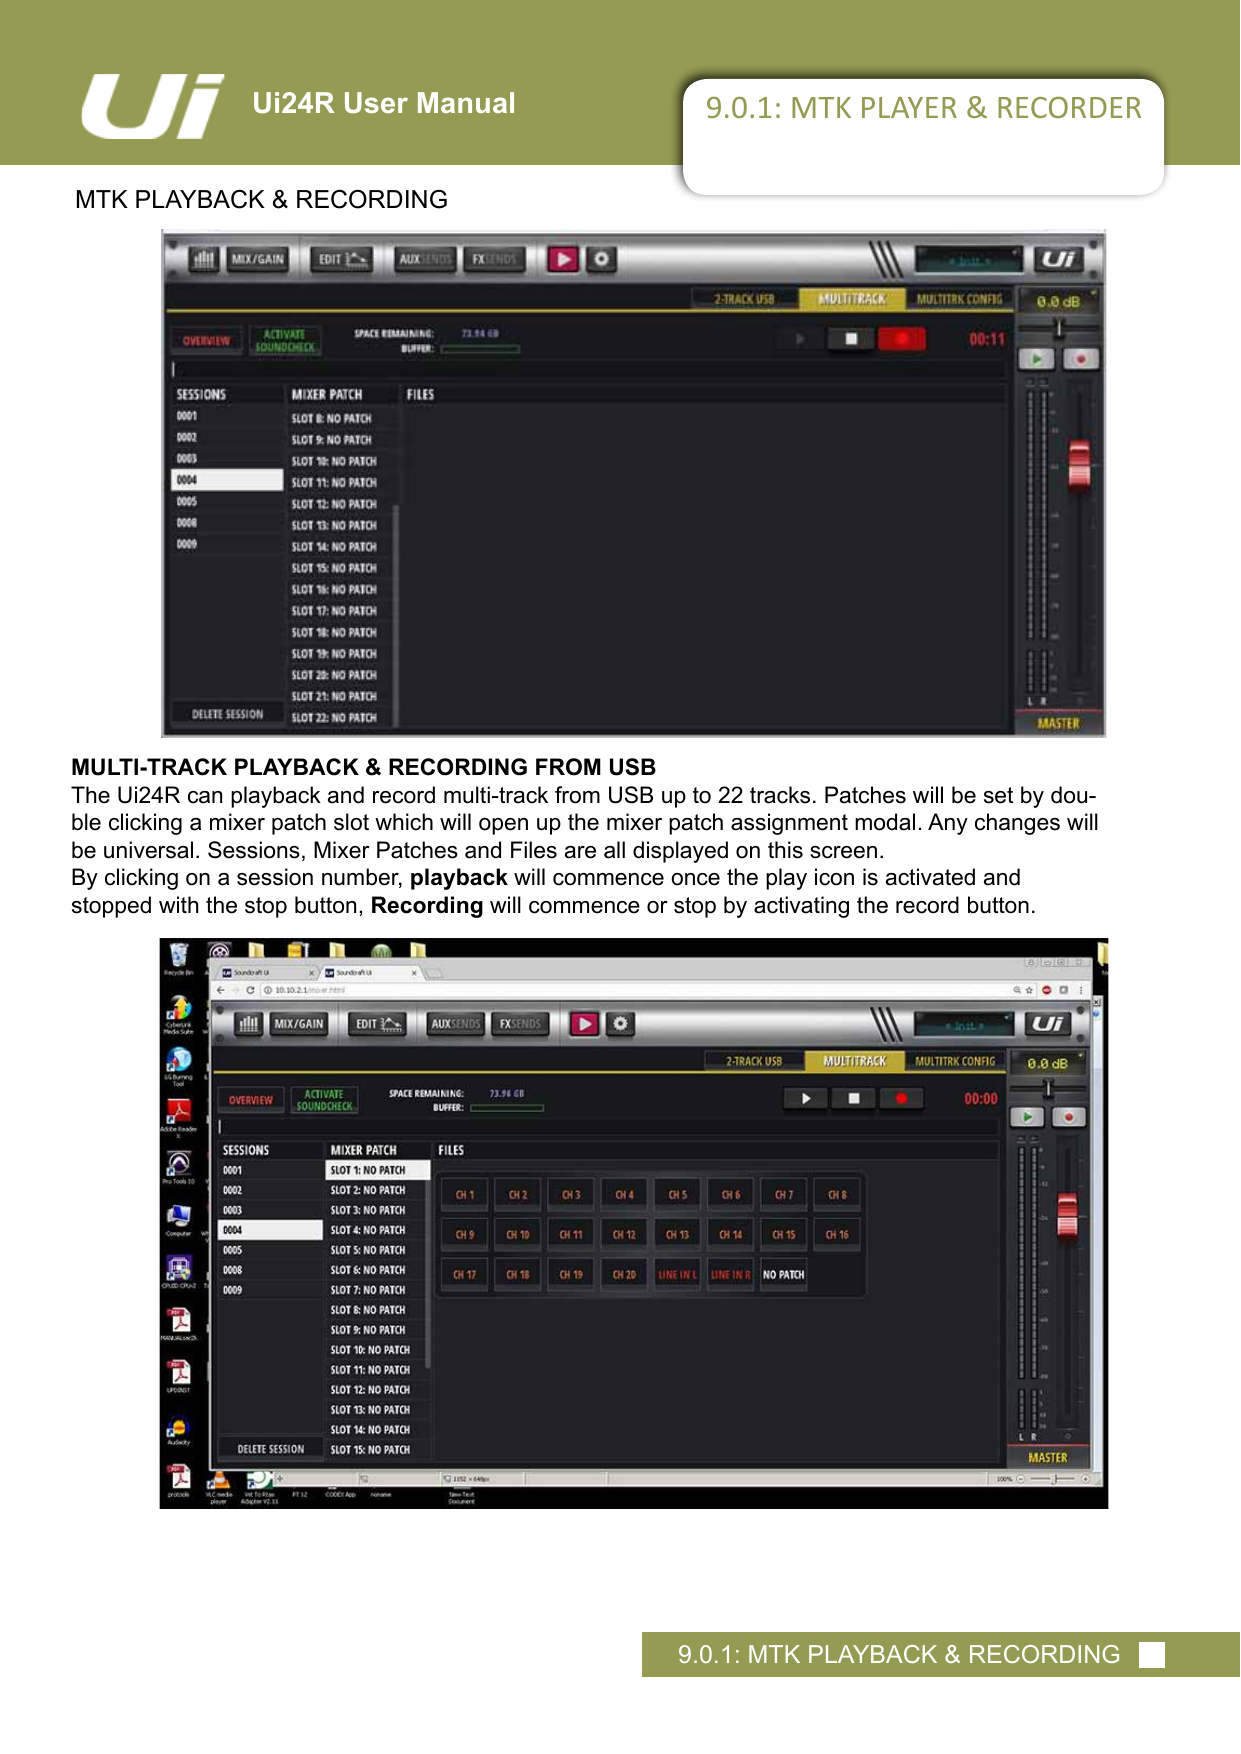 Ui24R User Manual 9.0.1: MTK PLAYER &amp; RECORDERMTK PLAYBACK &amp; RECORDING9.0.1: MTK PLAYBACK &amp; RECORDINGMULTI-TRACK PLAYBACK &amp; RECORDING FROM USBThe Ui24R can playback and record multi-track from USB up to 22 tracks. Patches will be set by dou-ble clicking a mixer patch slot which will open up the mixer patch assignment modal. Any changes will be universal. Sessions, Mixer Patches and Files are all displayed on this screen. By clicking on a session number, playback will commence once the play icon is activated and stopped with the stop button, Recording will commence or stop by activating the record button.